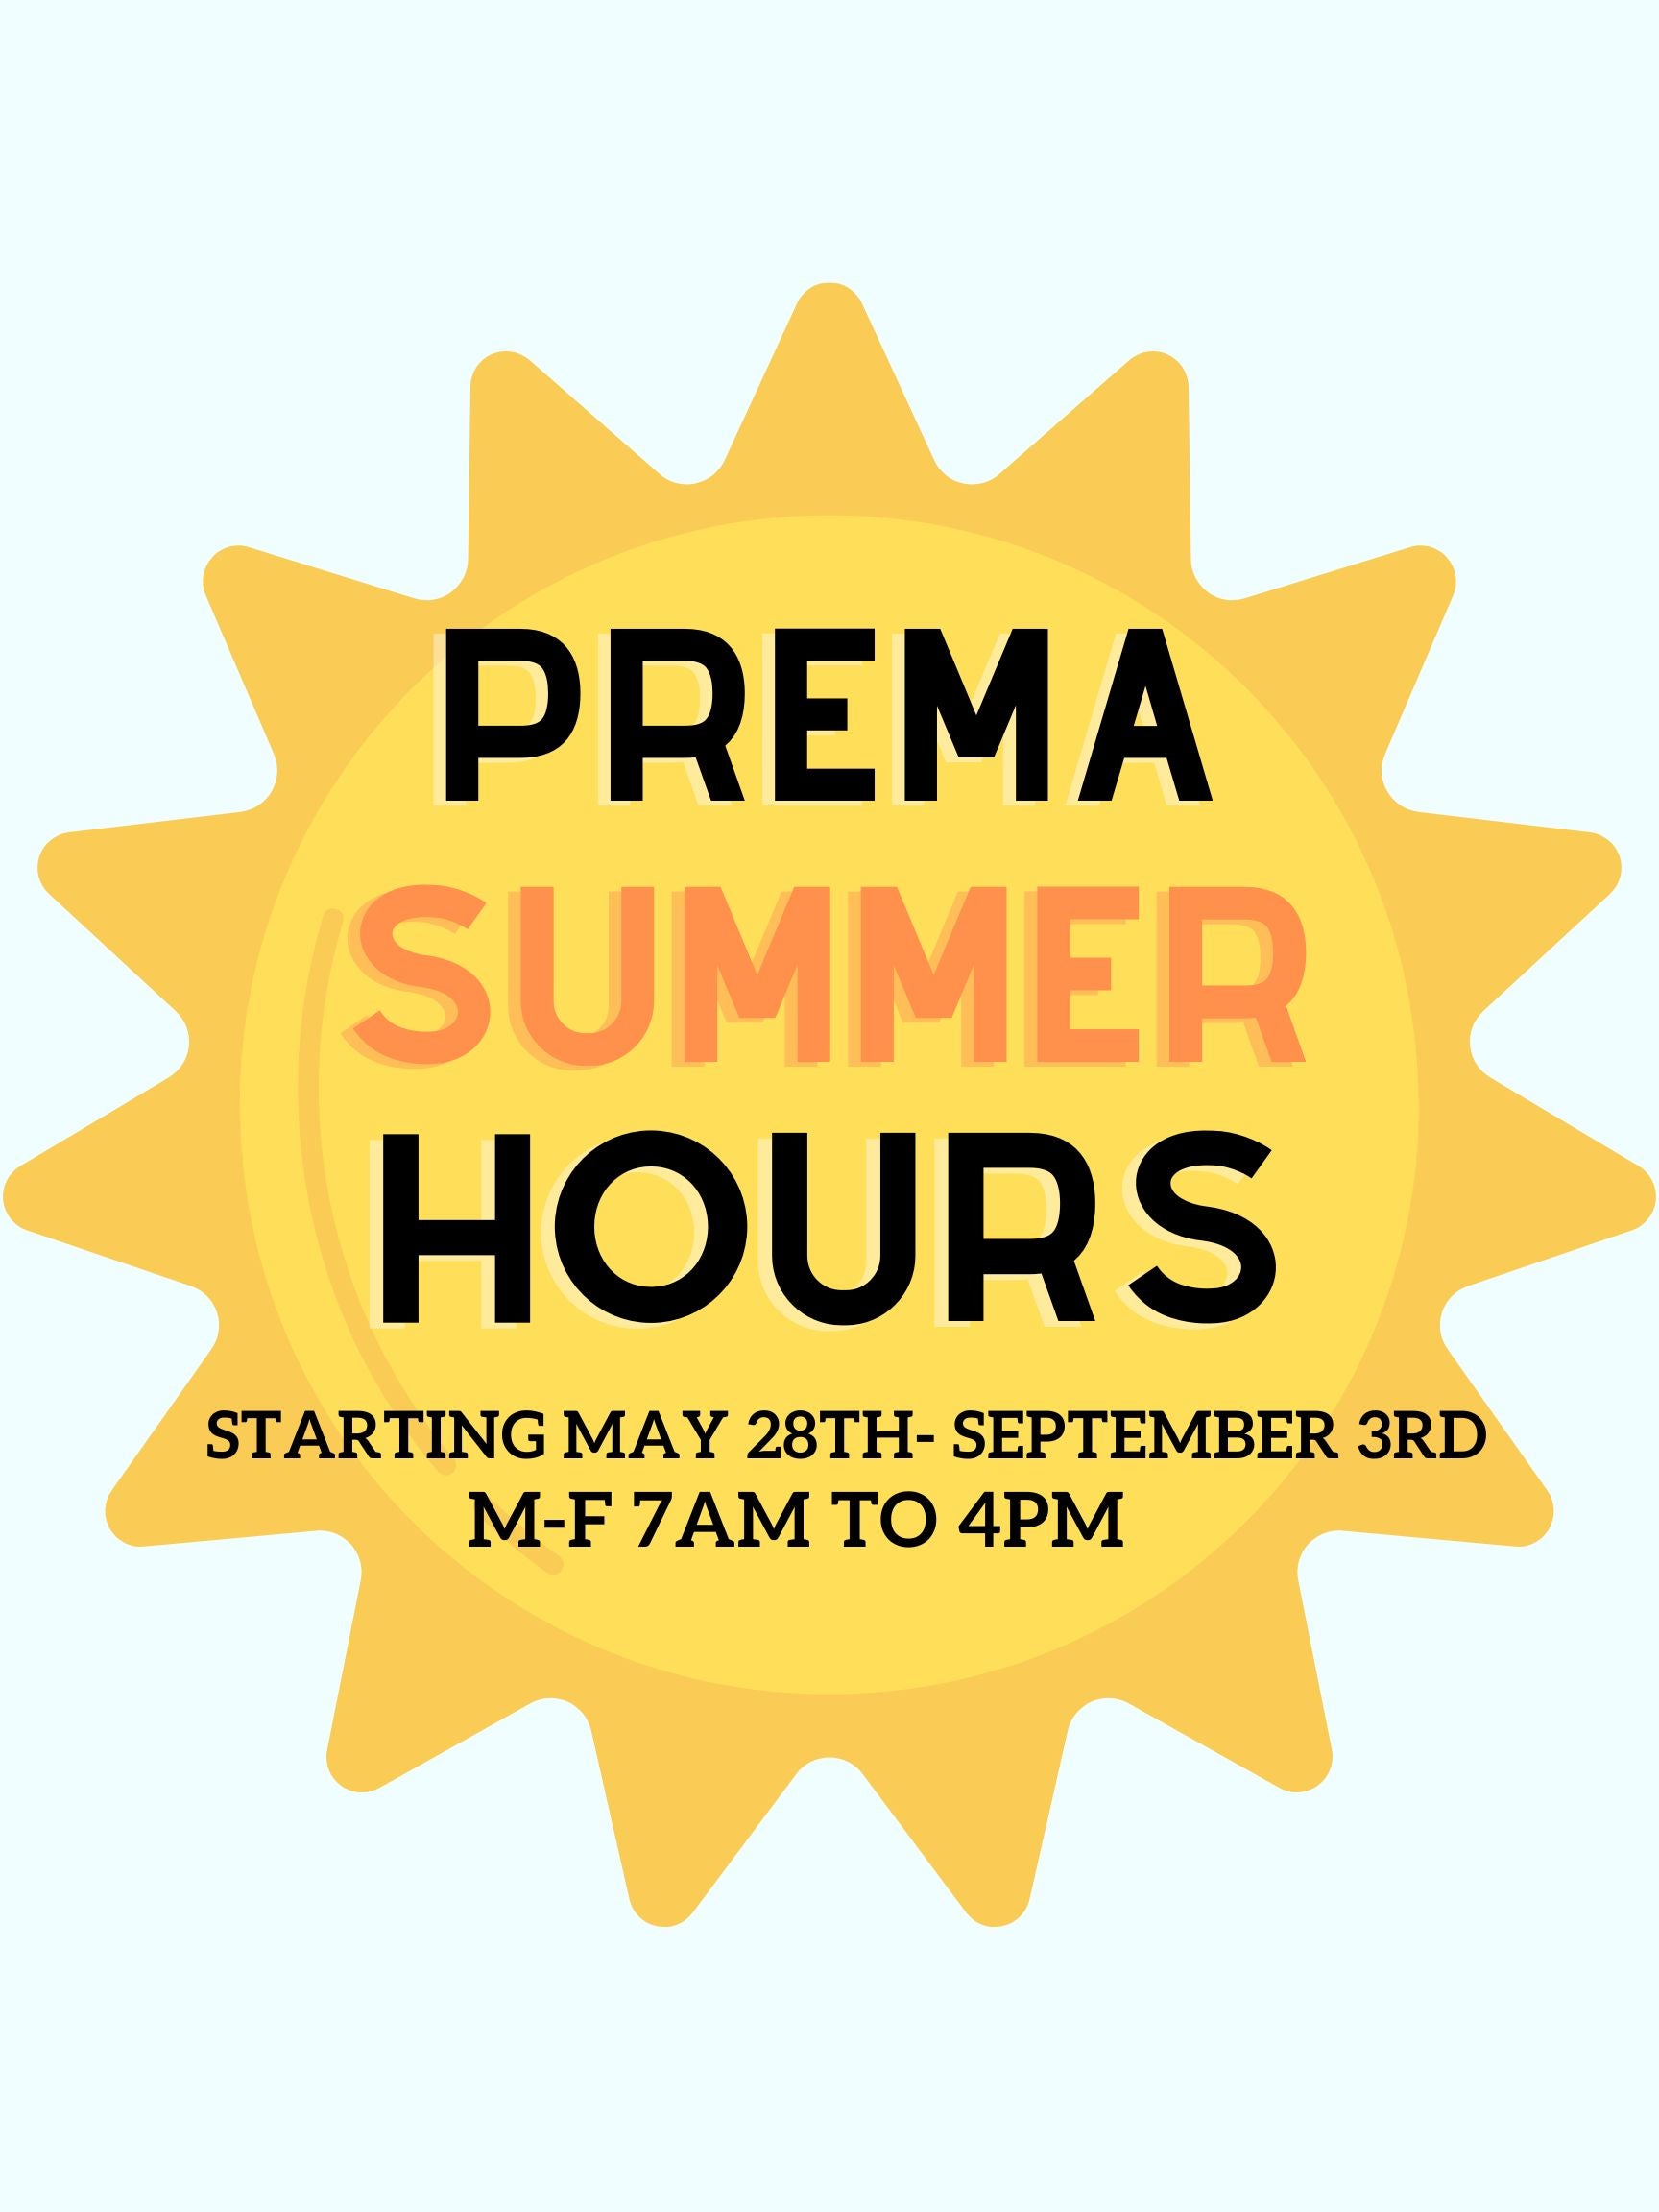 Summer Hours 7am-4pm in effect from May 28th-September 